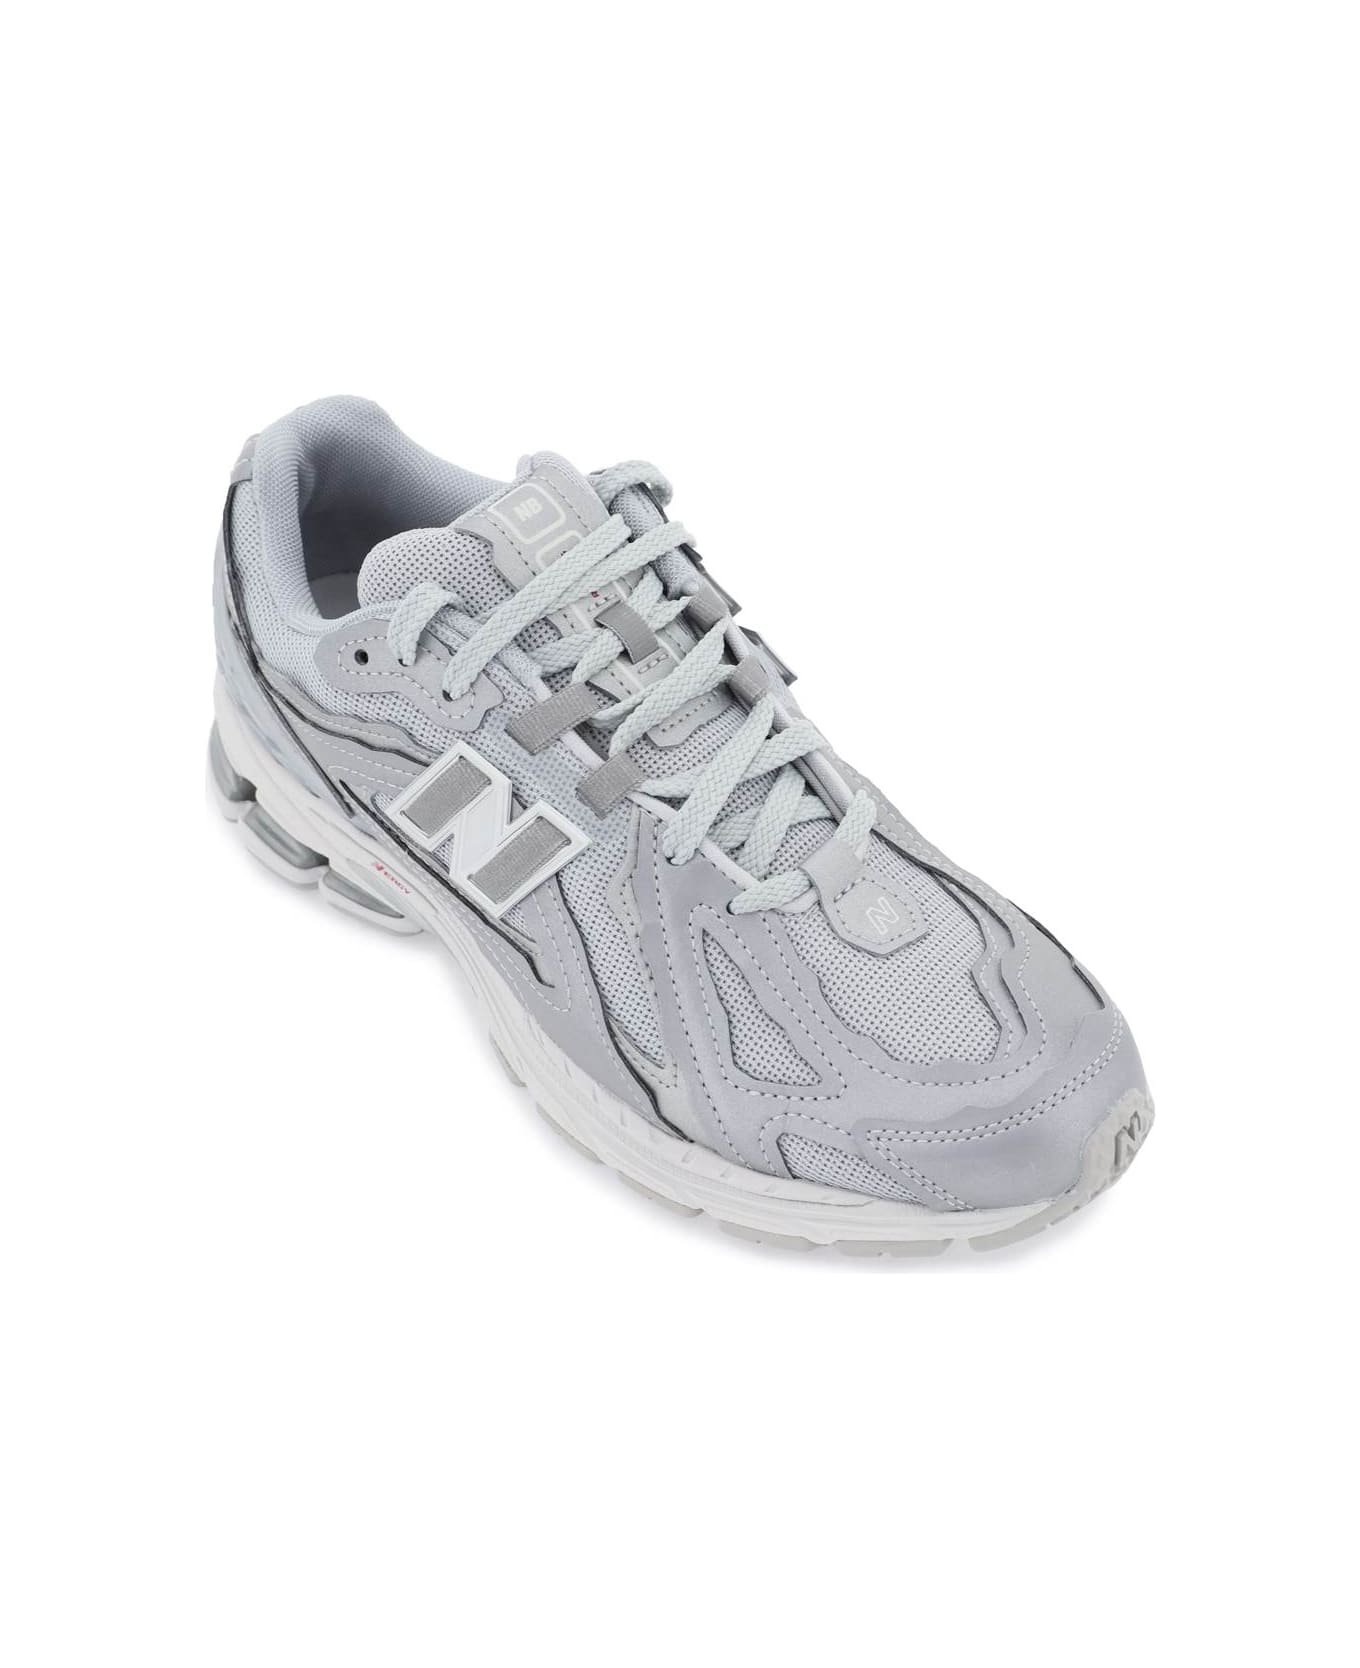 New Balance 1906dh Sneakers - SILVER METALLIC (Silver) スニーカー